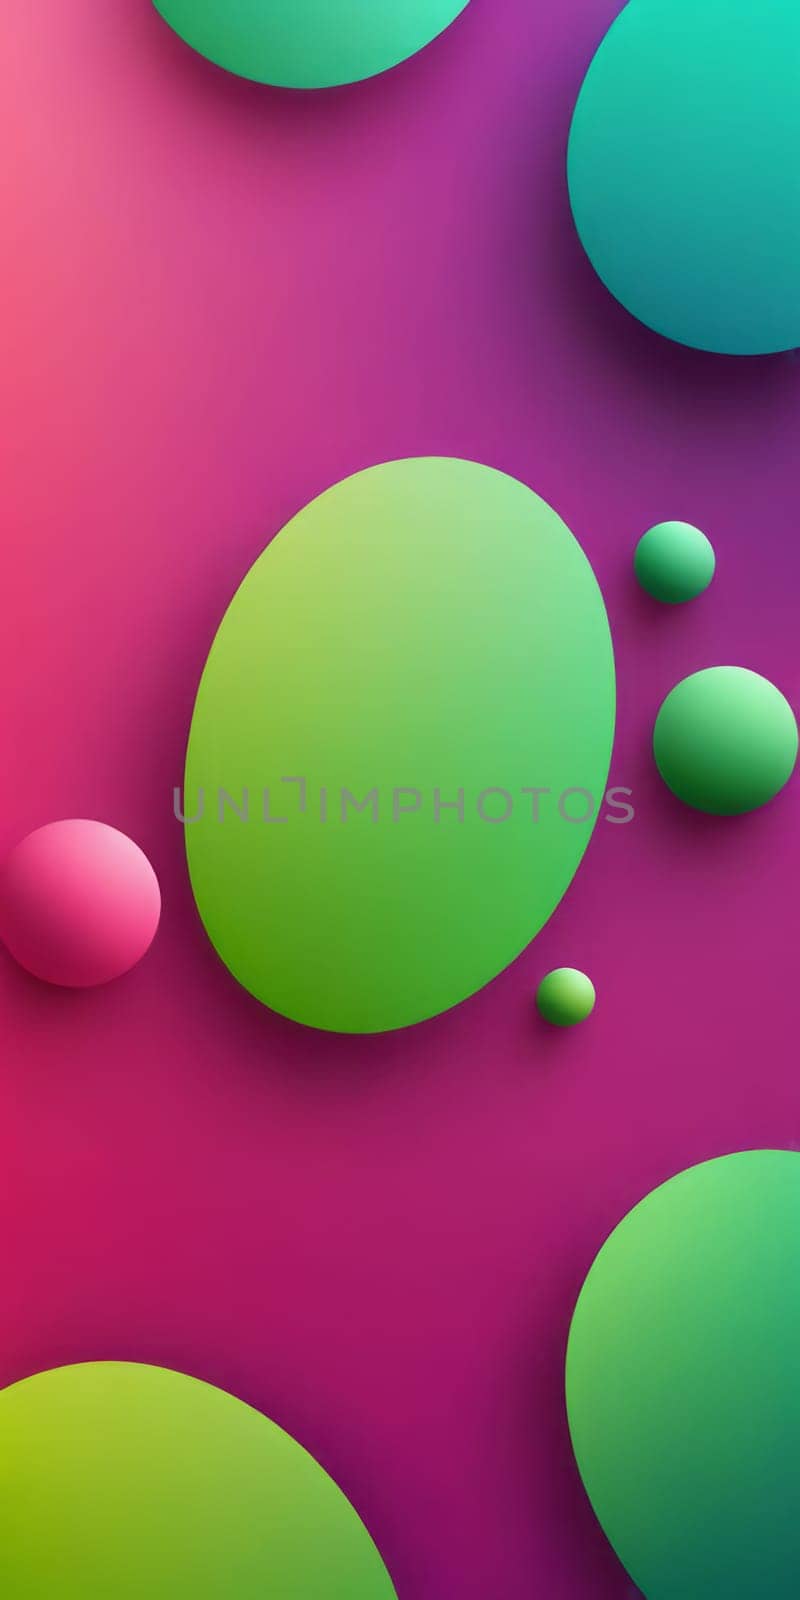 Organic Shapes in Fuchsia and Green by nkotlyar